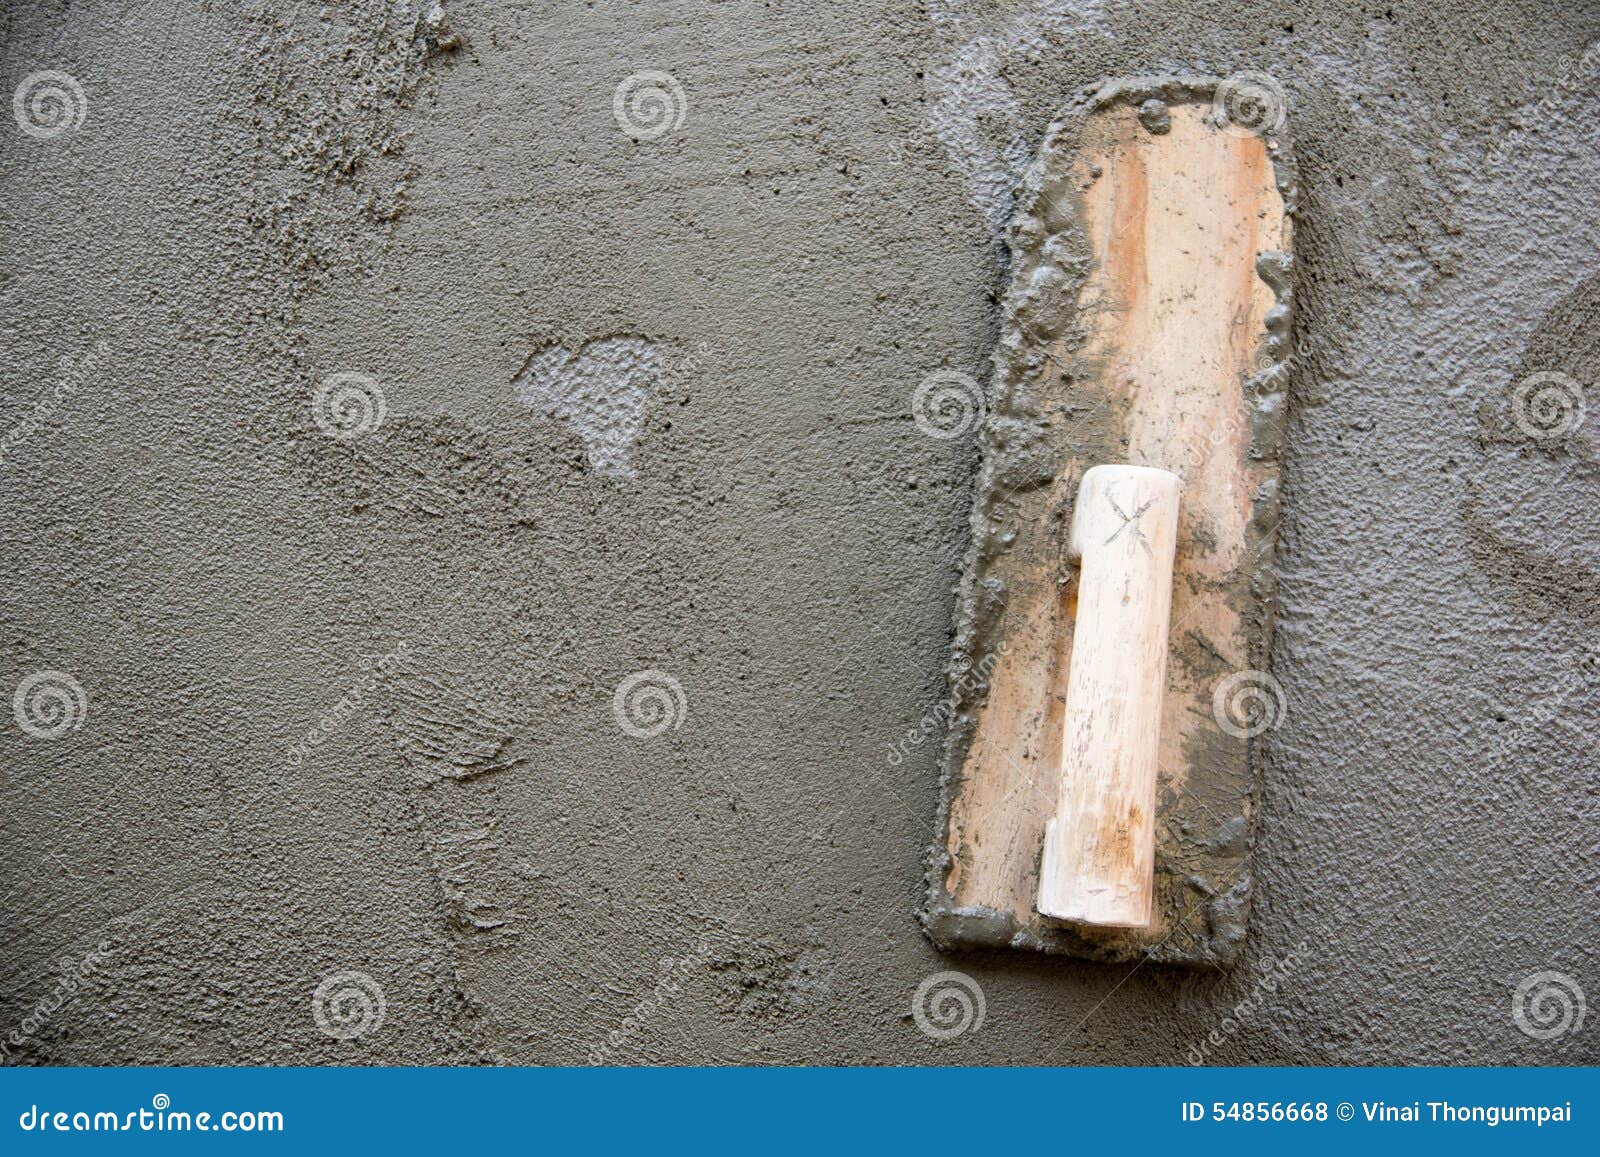 Thai cement working tool stock photo. Image of gadgetry - 54856668